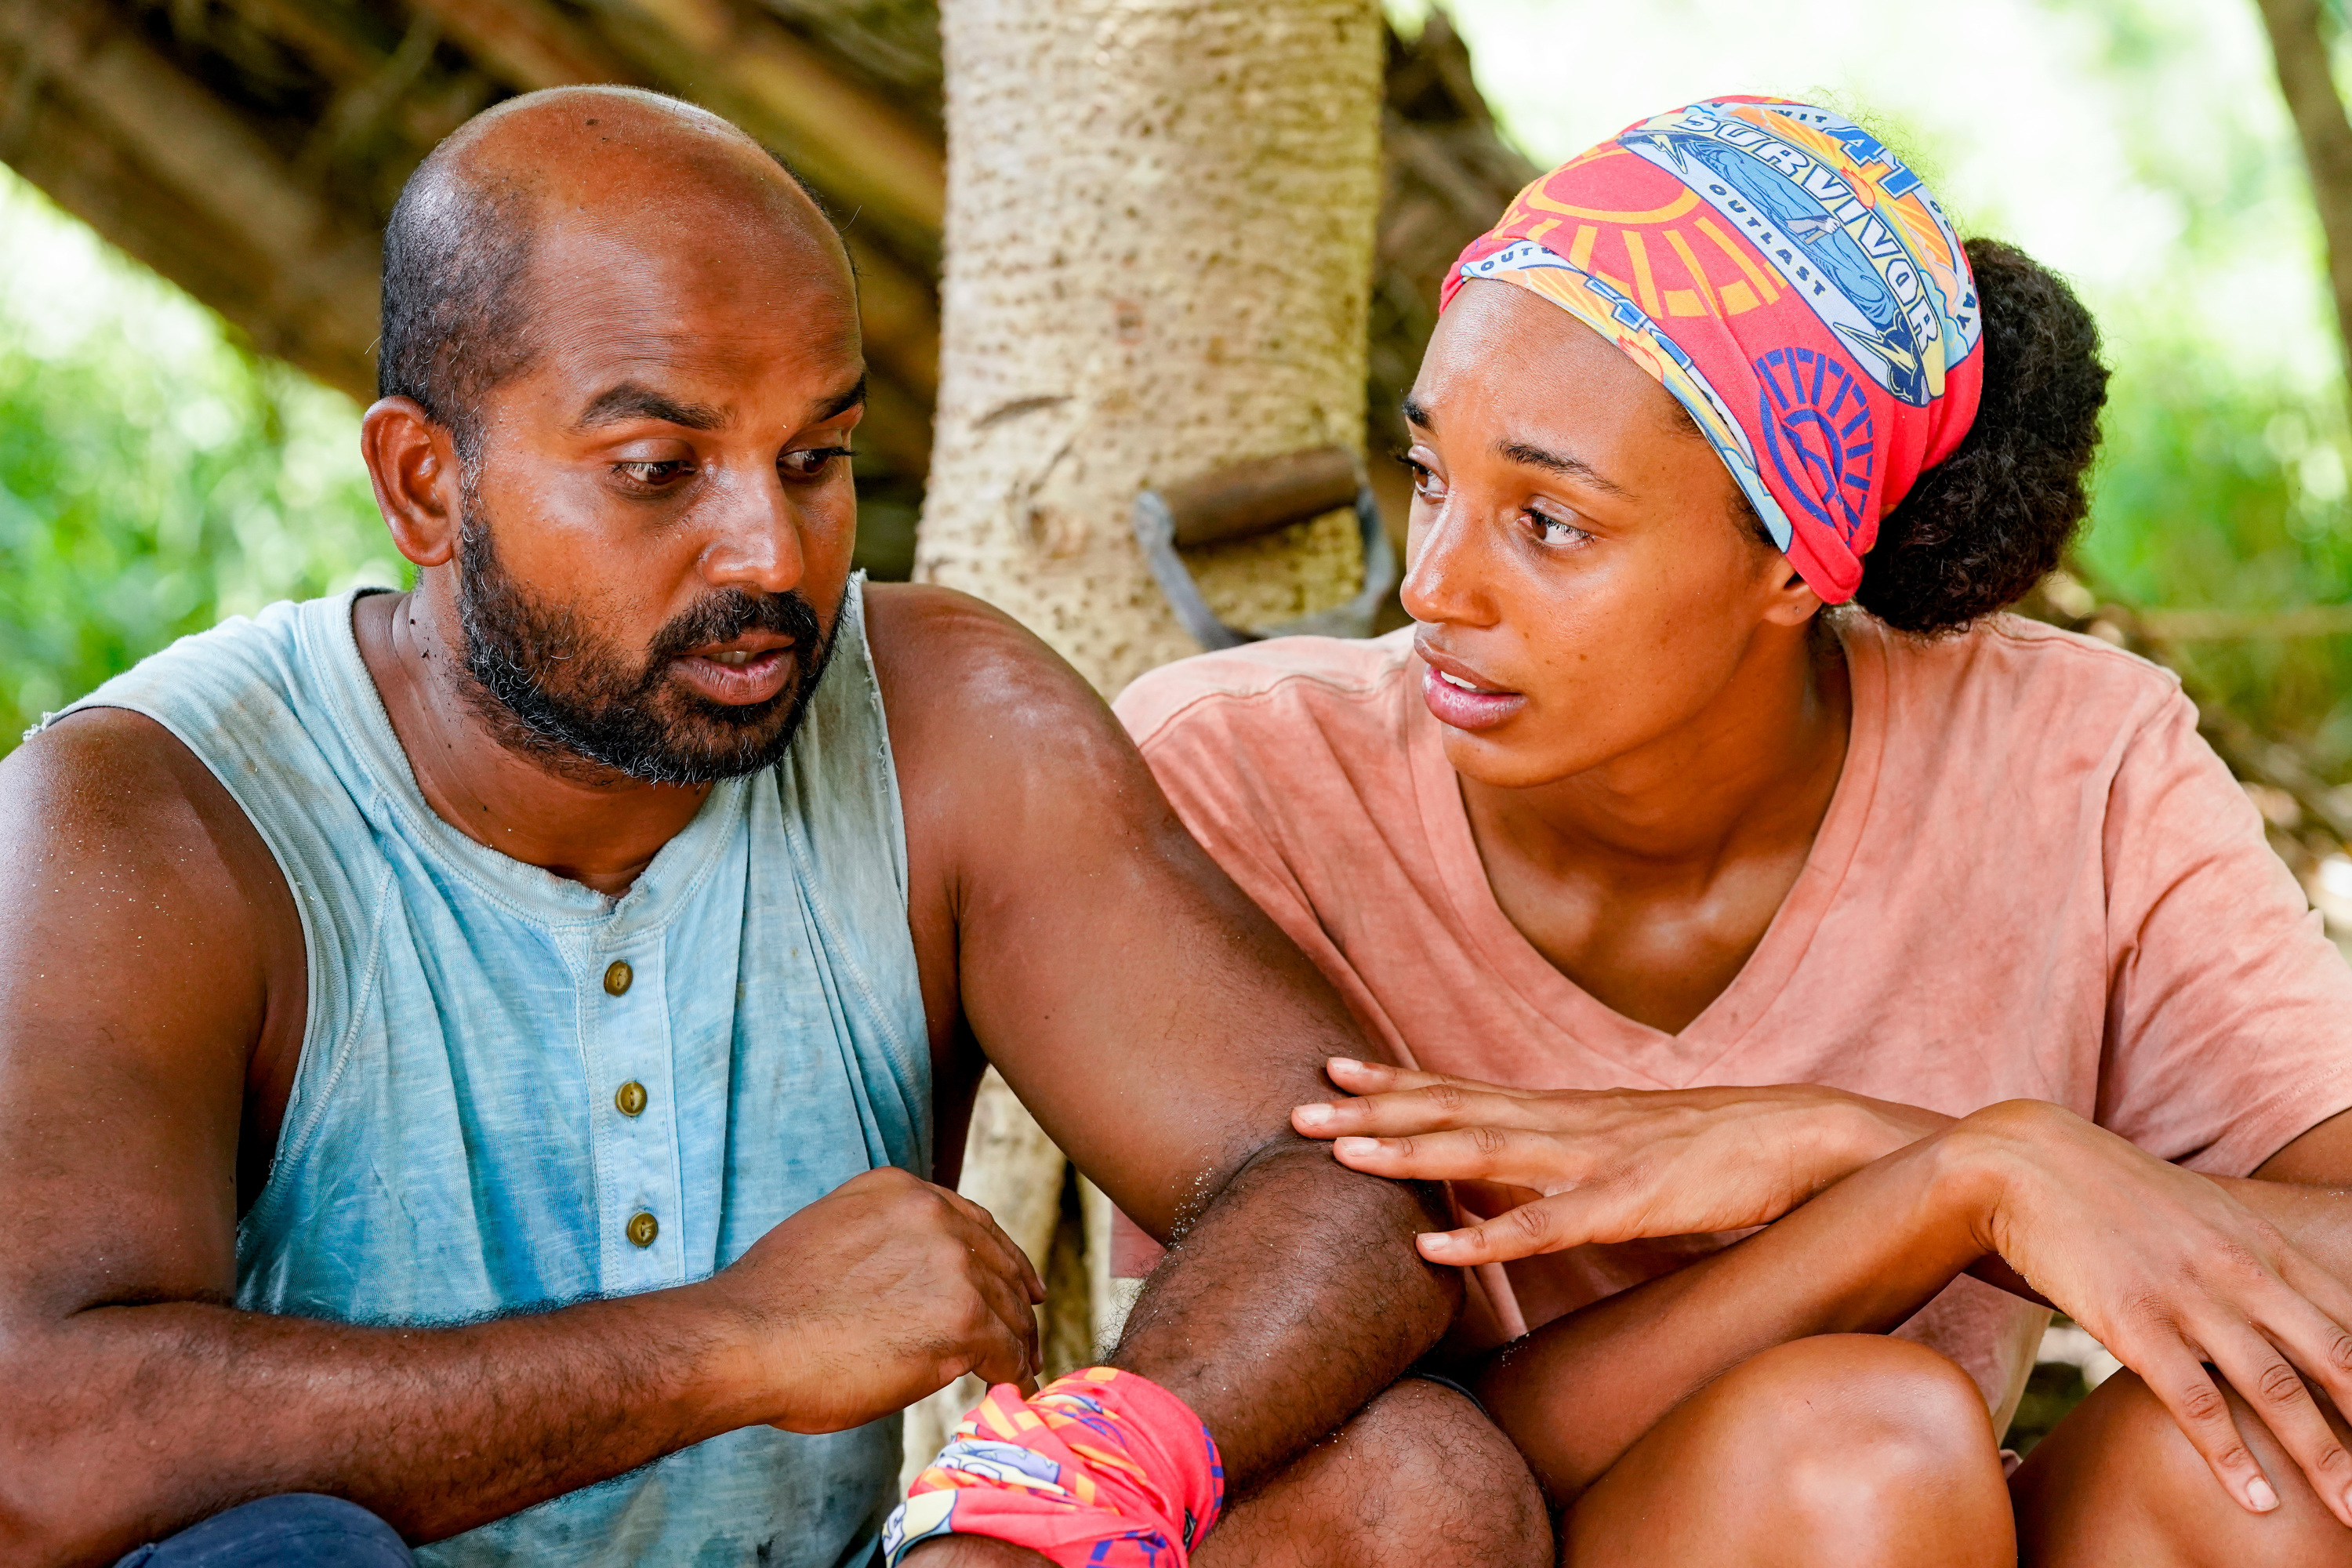 “Betraydar” — Naseer Muttalif and Shantel Smith on the eighth episode of SURVIVOR 41, airing Wednesday, November 10 (8:00-9:00 PM, ET/PT) on the CBS Television Network, and available to stream live and on demand on Paramount+. Photo: Robert Voets/CBS Entertainment 2021 CBS Broadcasting, Inc. All Rights Reserved.